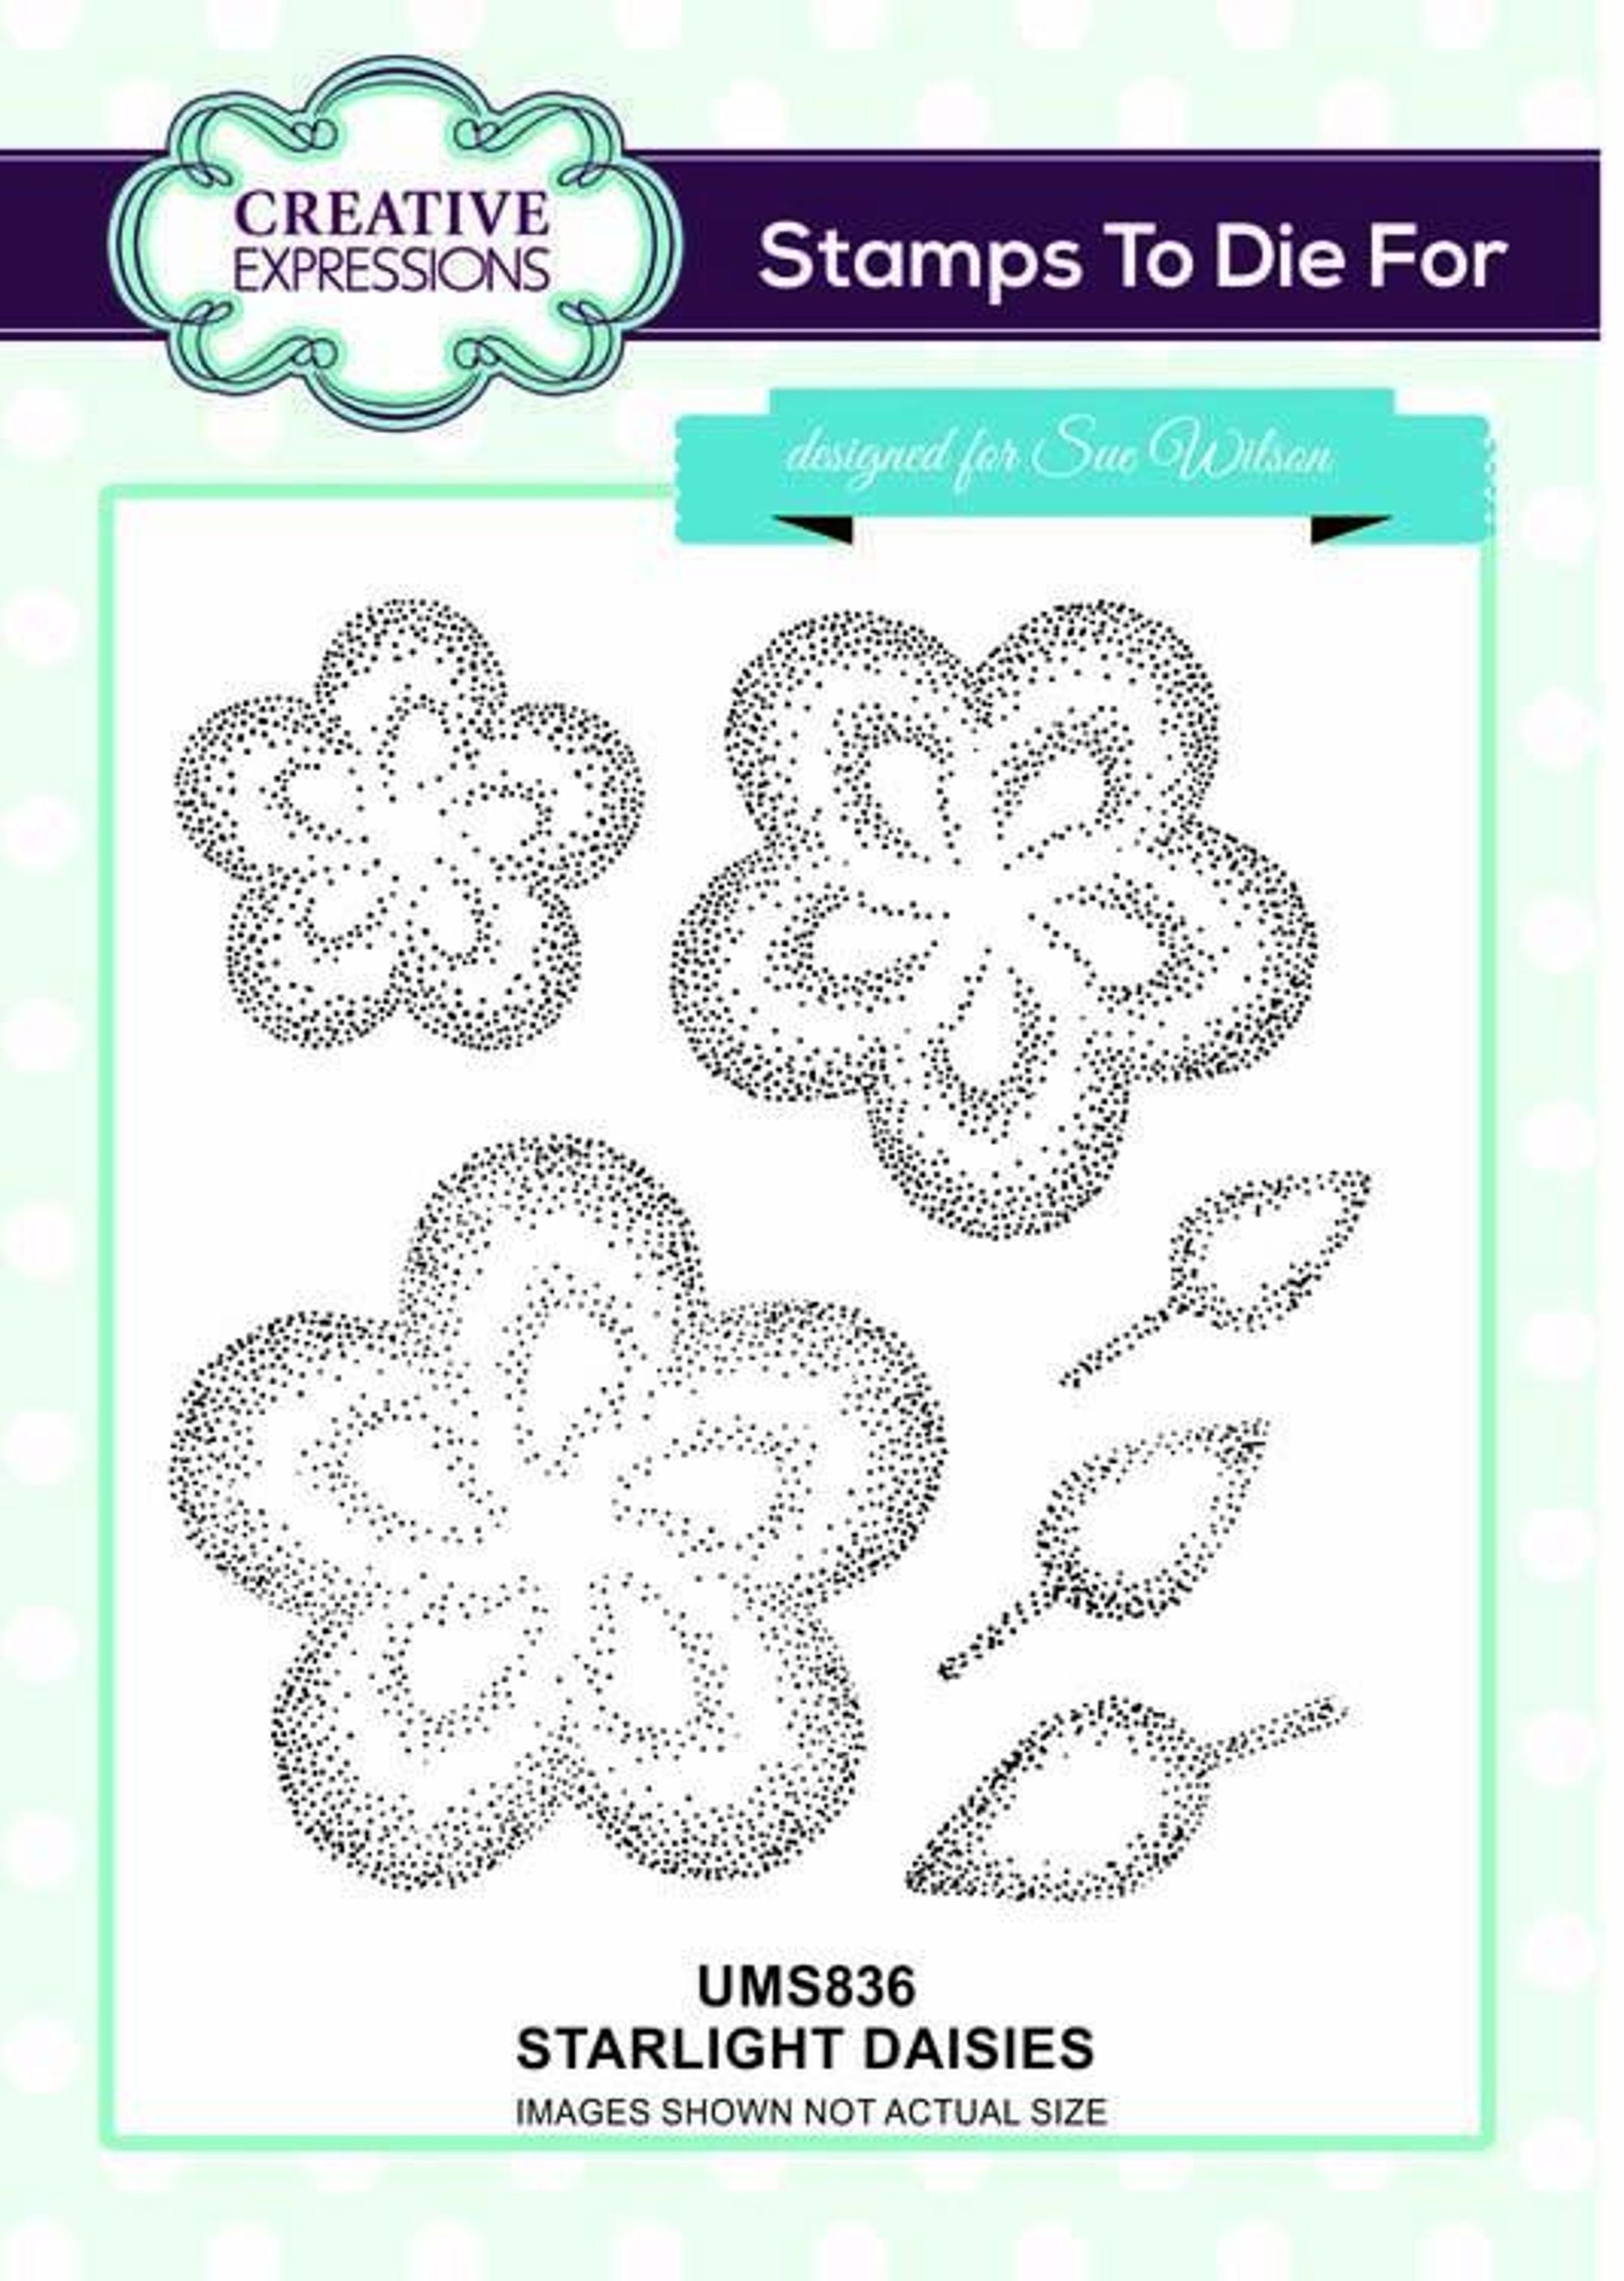 Stamps To Die For Starlight Daisies